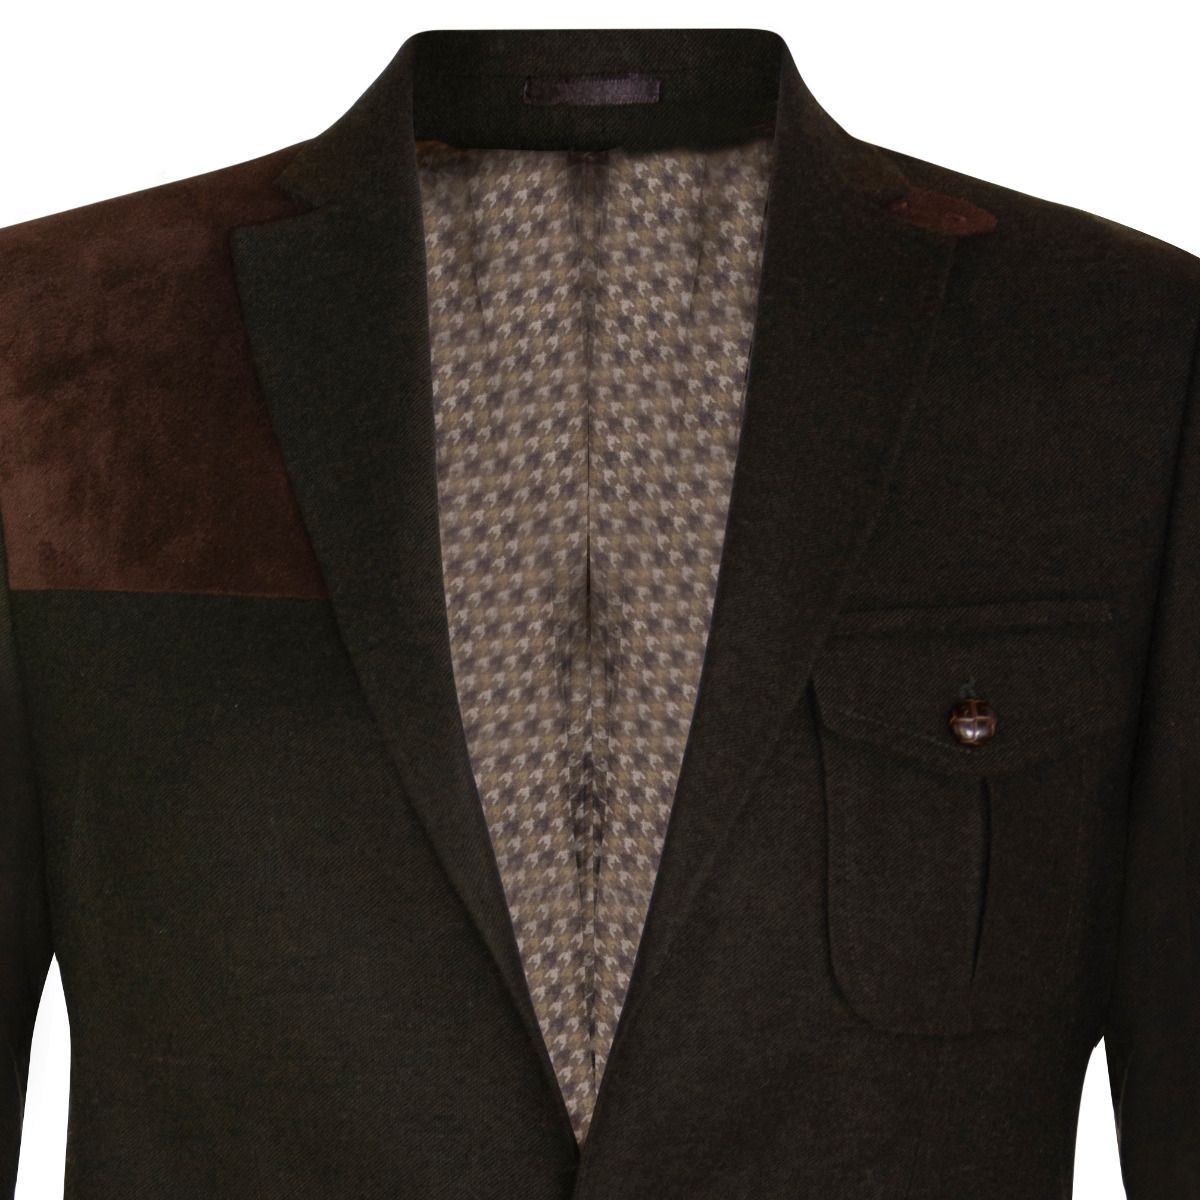 Mens Wool Tweed Shooting Jacket Hunting Blazer Smart Casual Elbow Patch Olive - Upperclass Fashions 